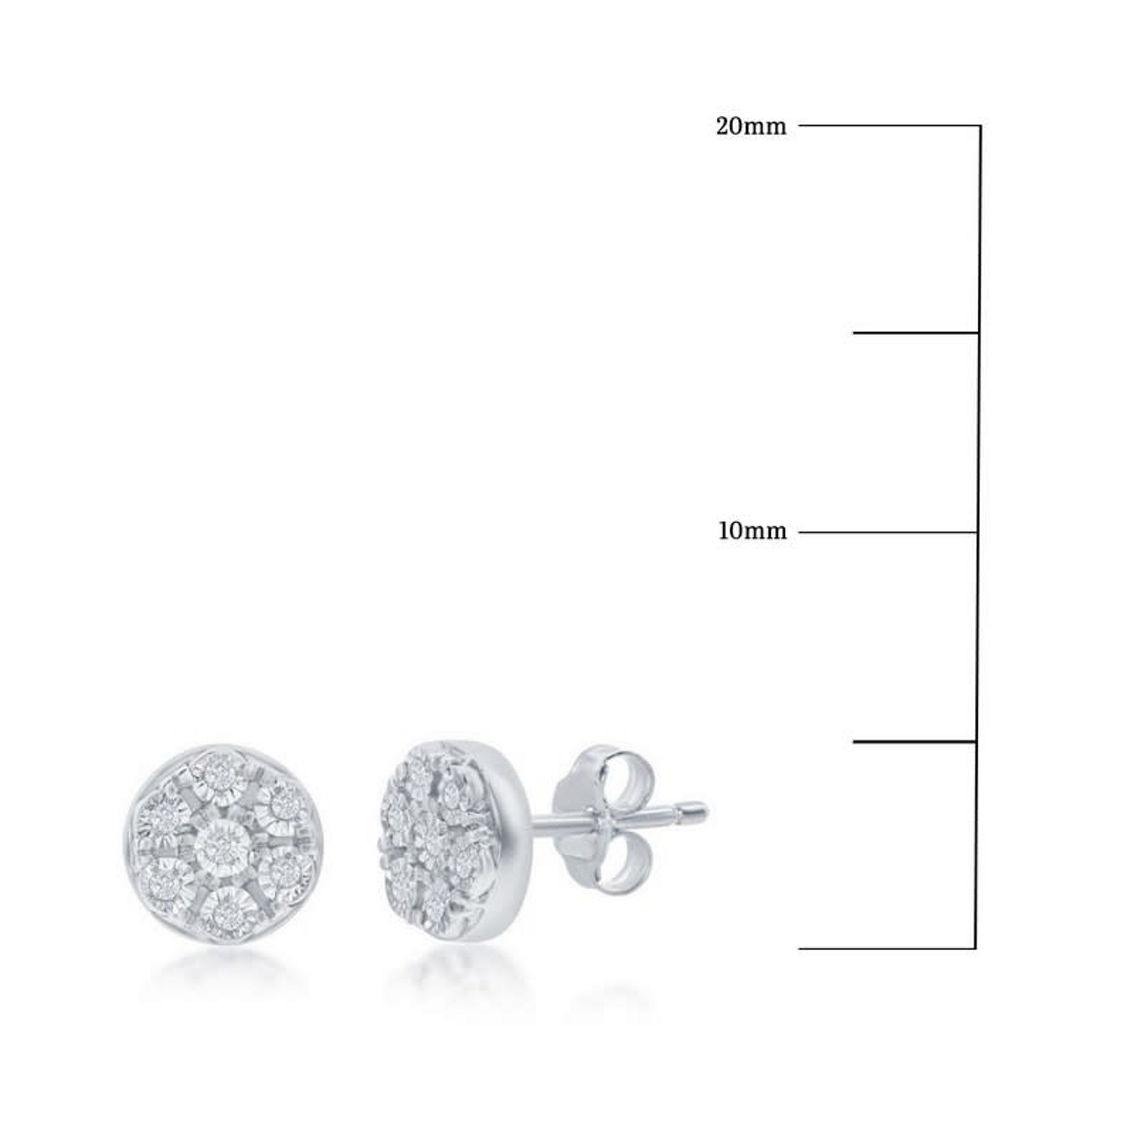 Diamonds D'Argento Sterling Silver Cluster of Diamonds 5mm Studs - (14 Stones) - Image 2 of 3